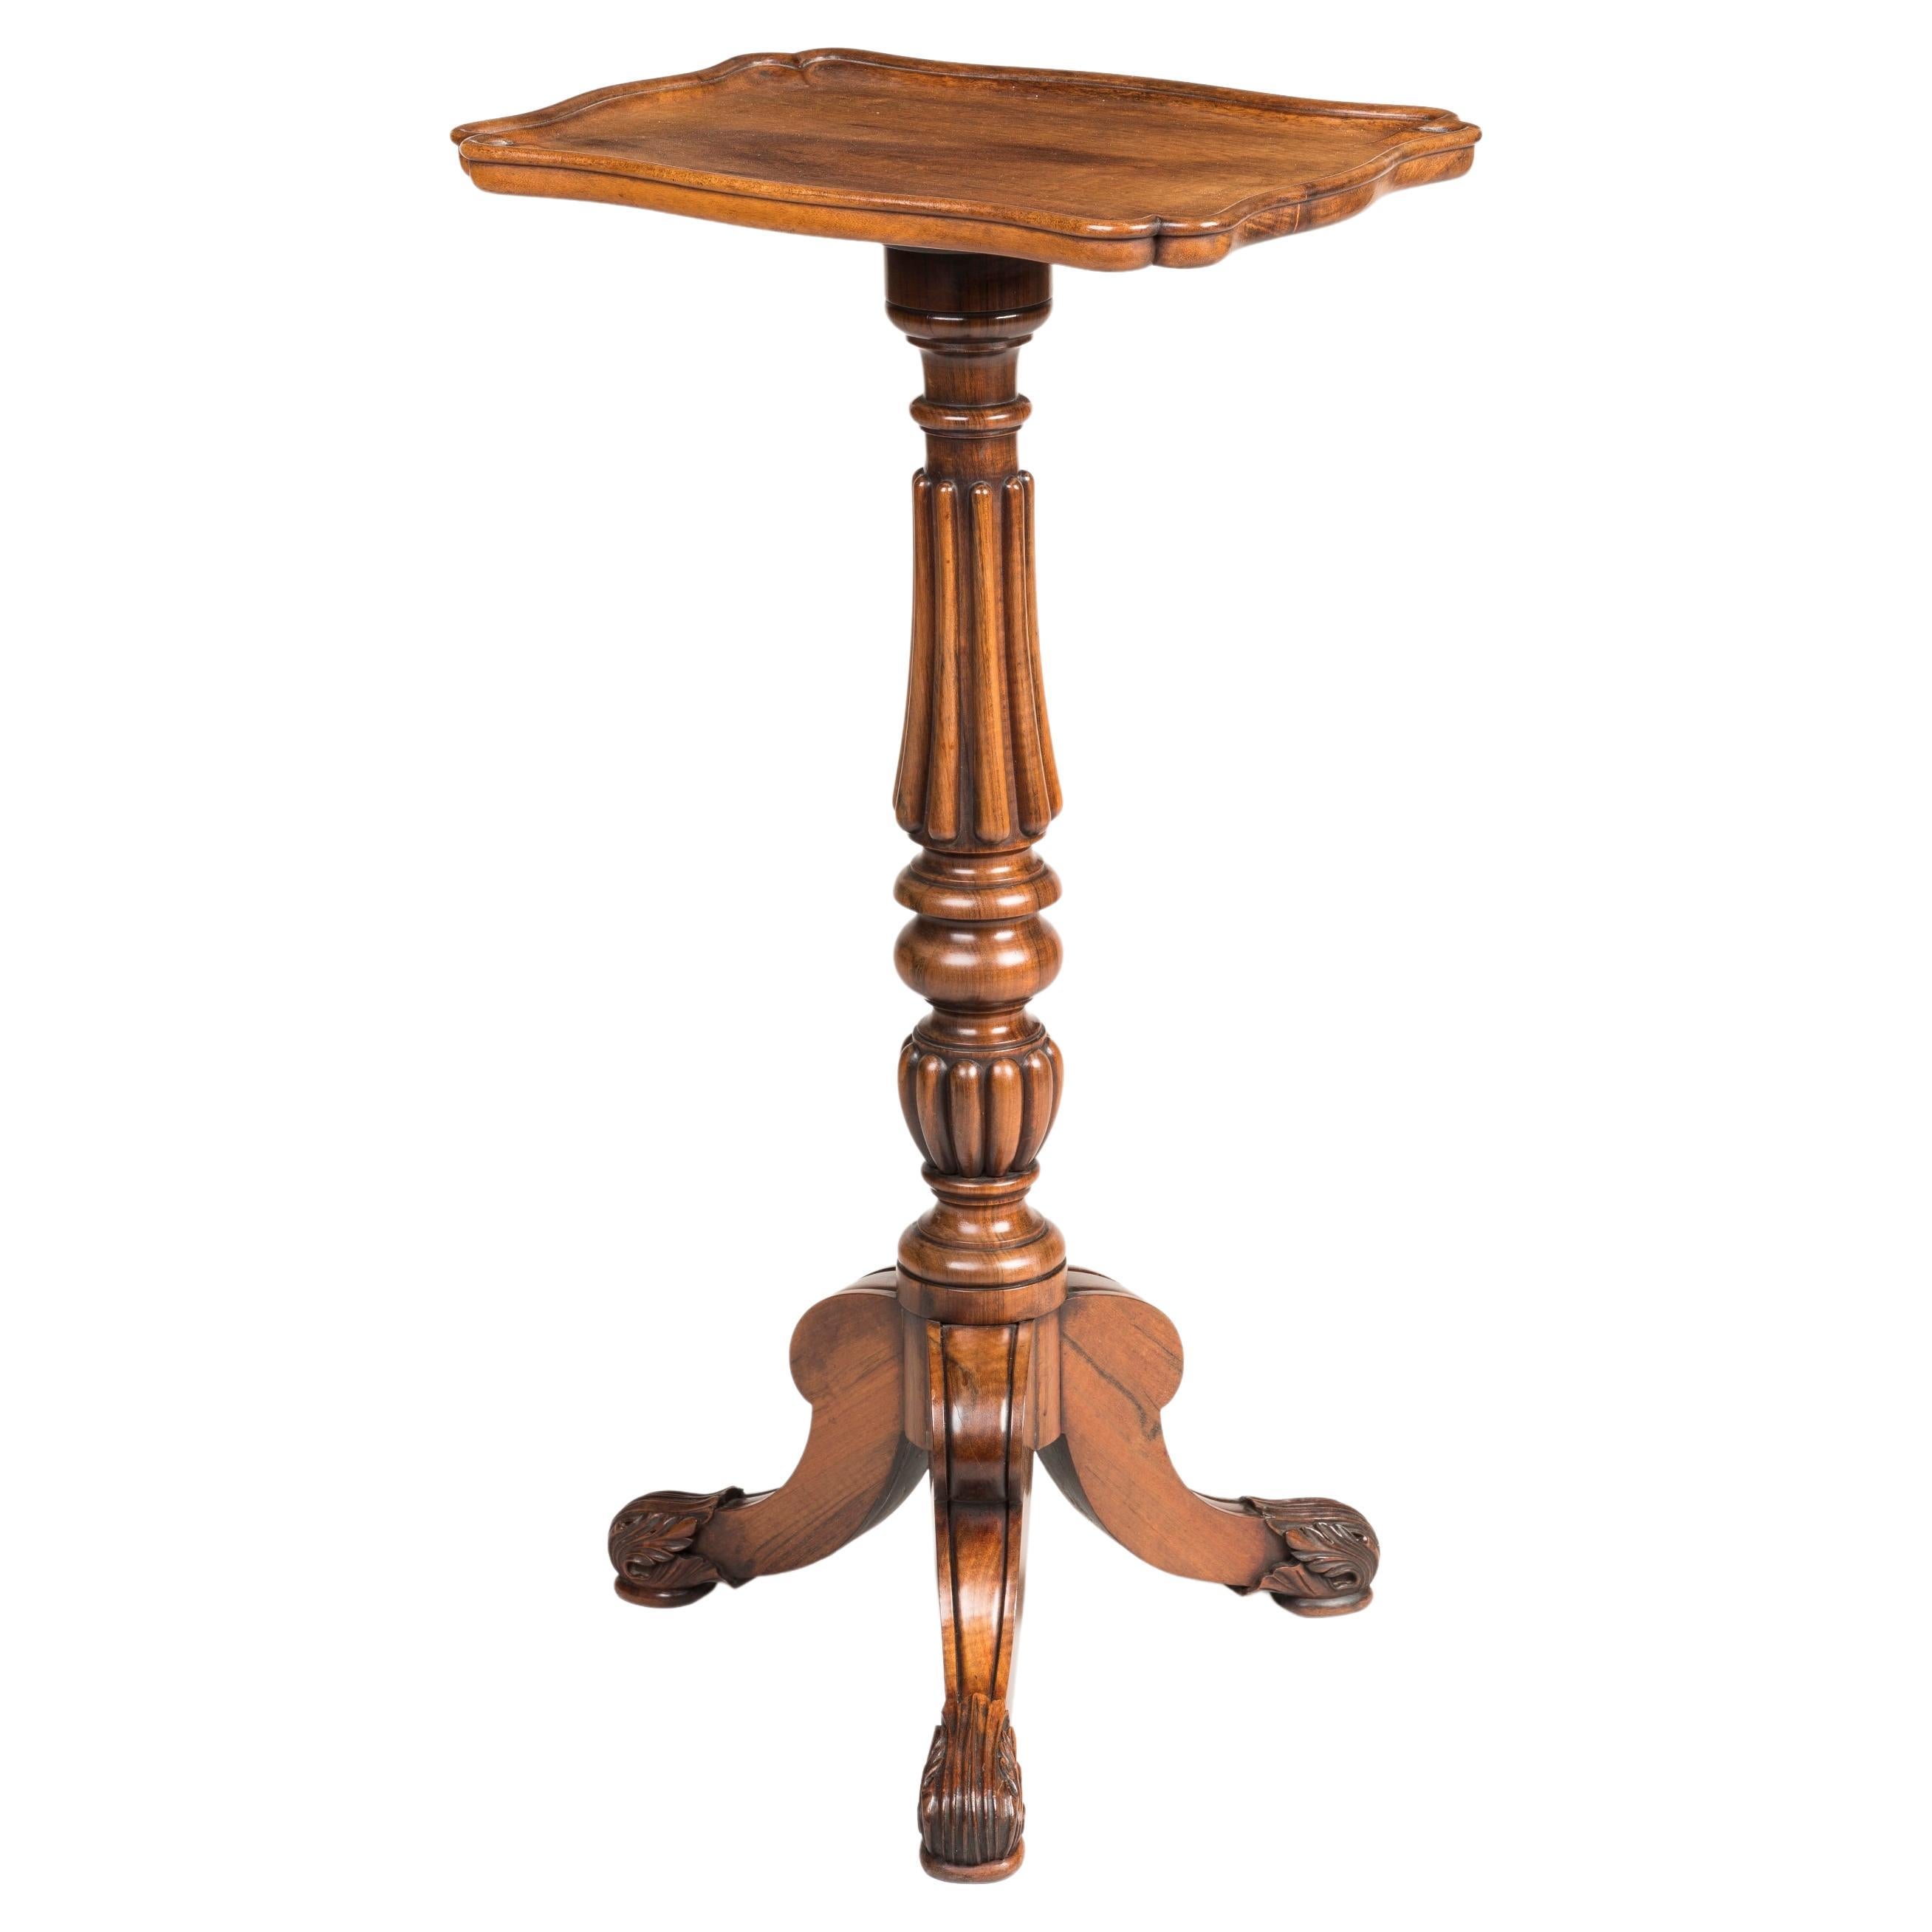 Late Georgian Rosewood Tripod Side Table Attributed to Gillows